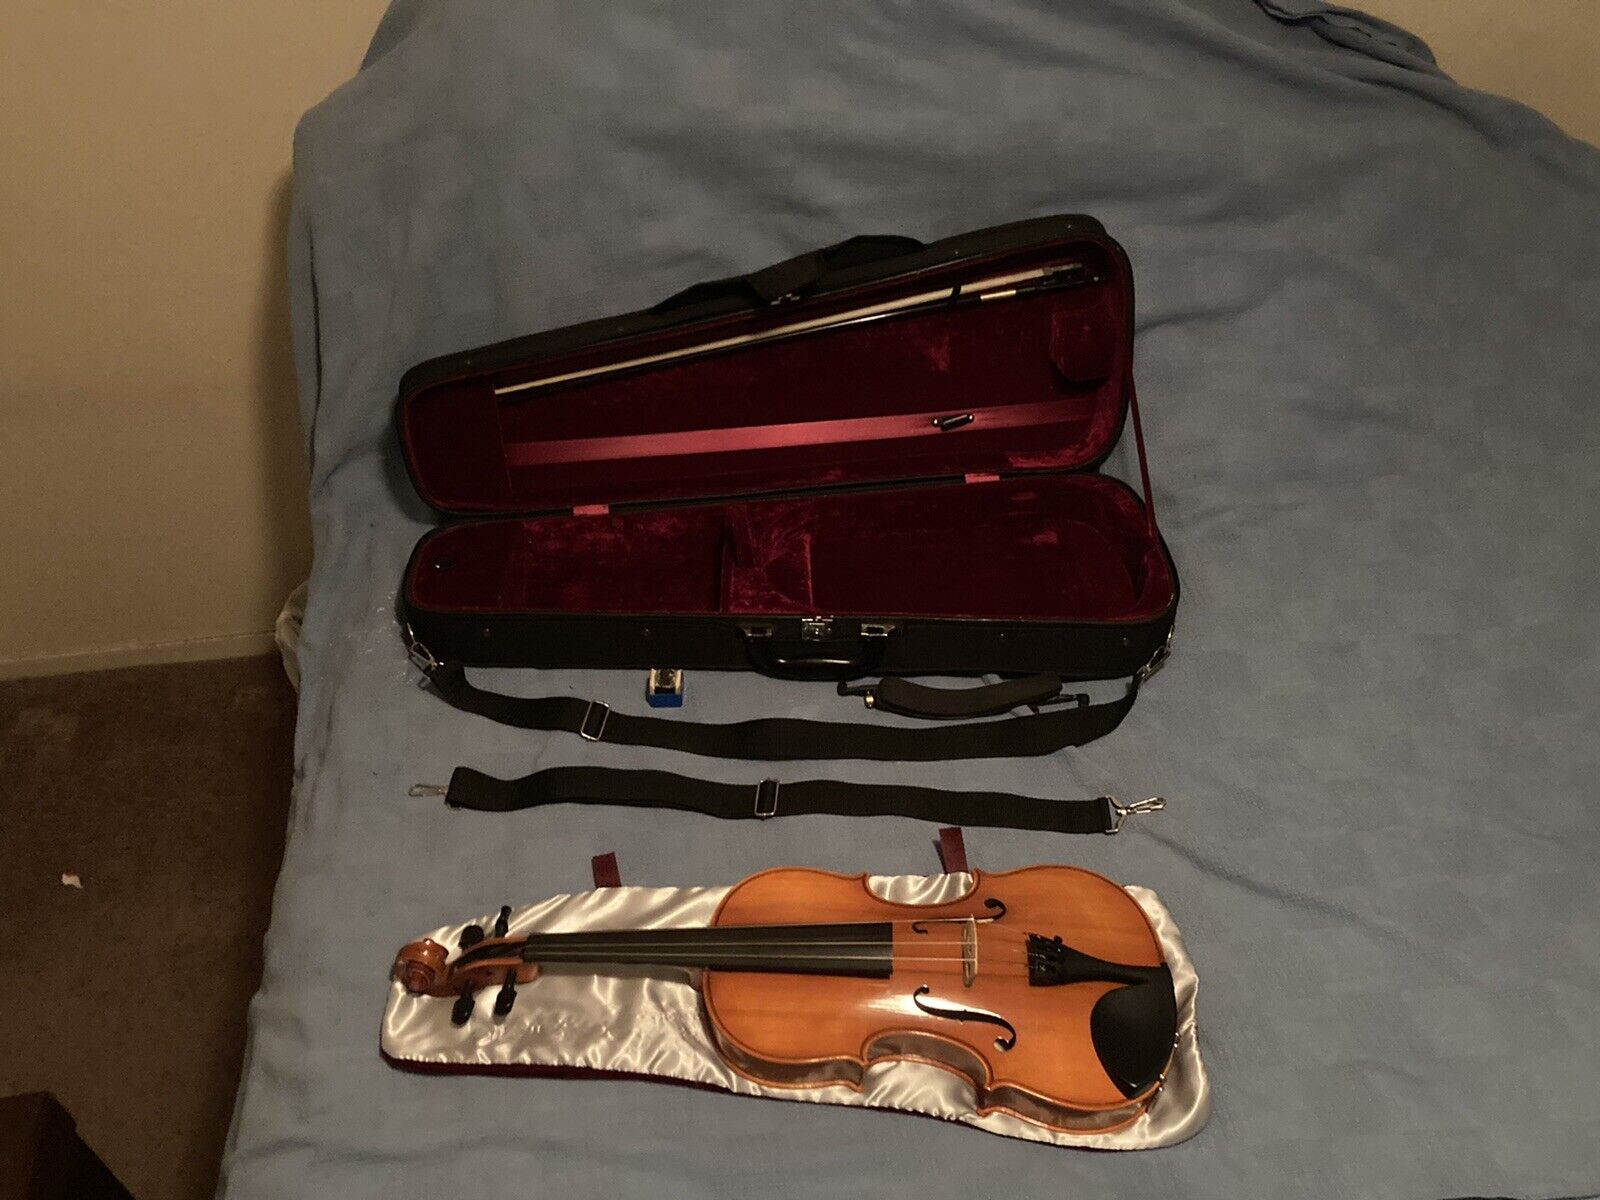 Nearly Unused 15" Eastman Viola Set; Lined Case, Bow, Shoulder&chin Rests, Rosin